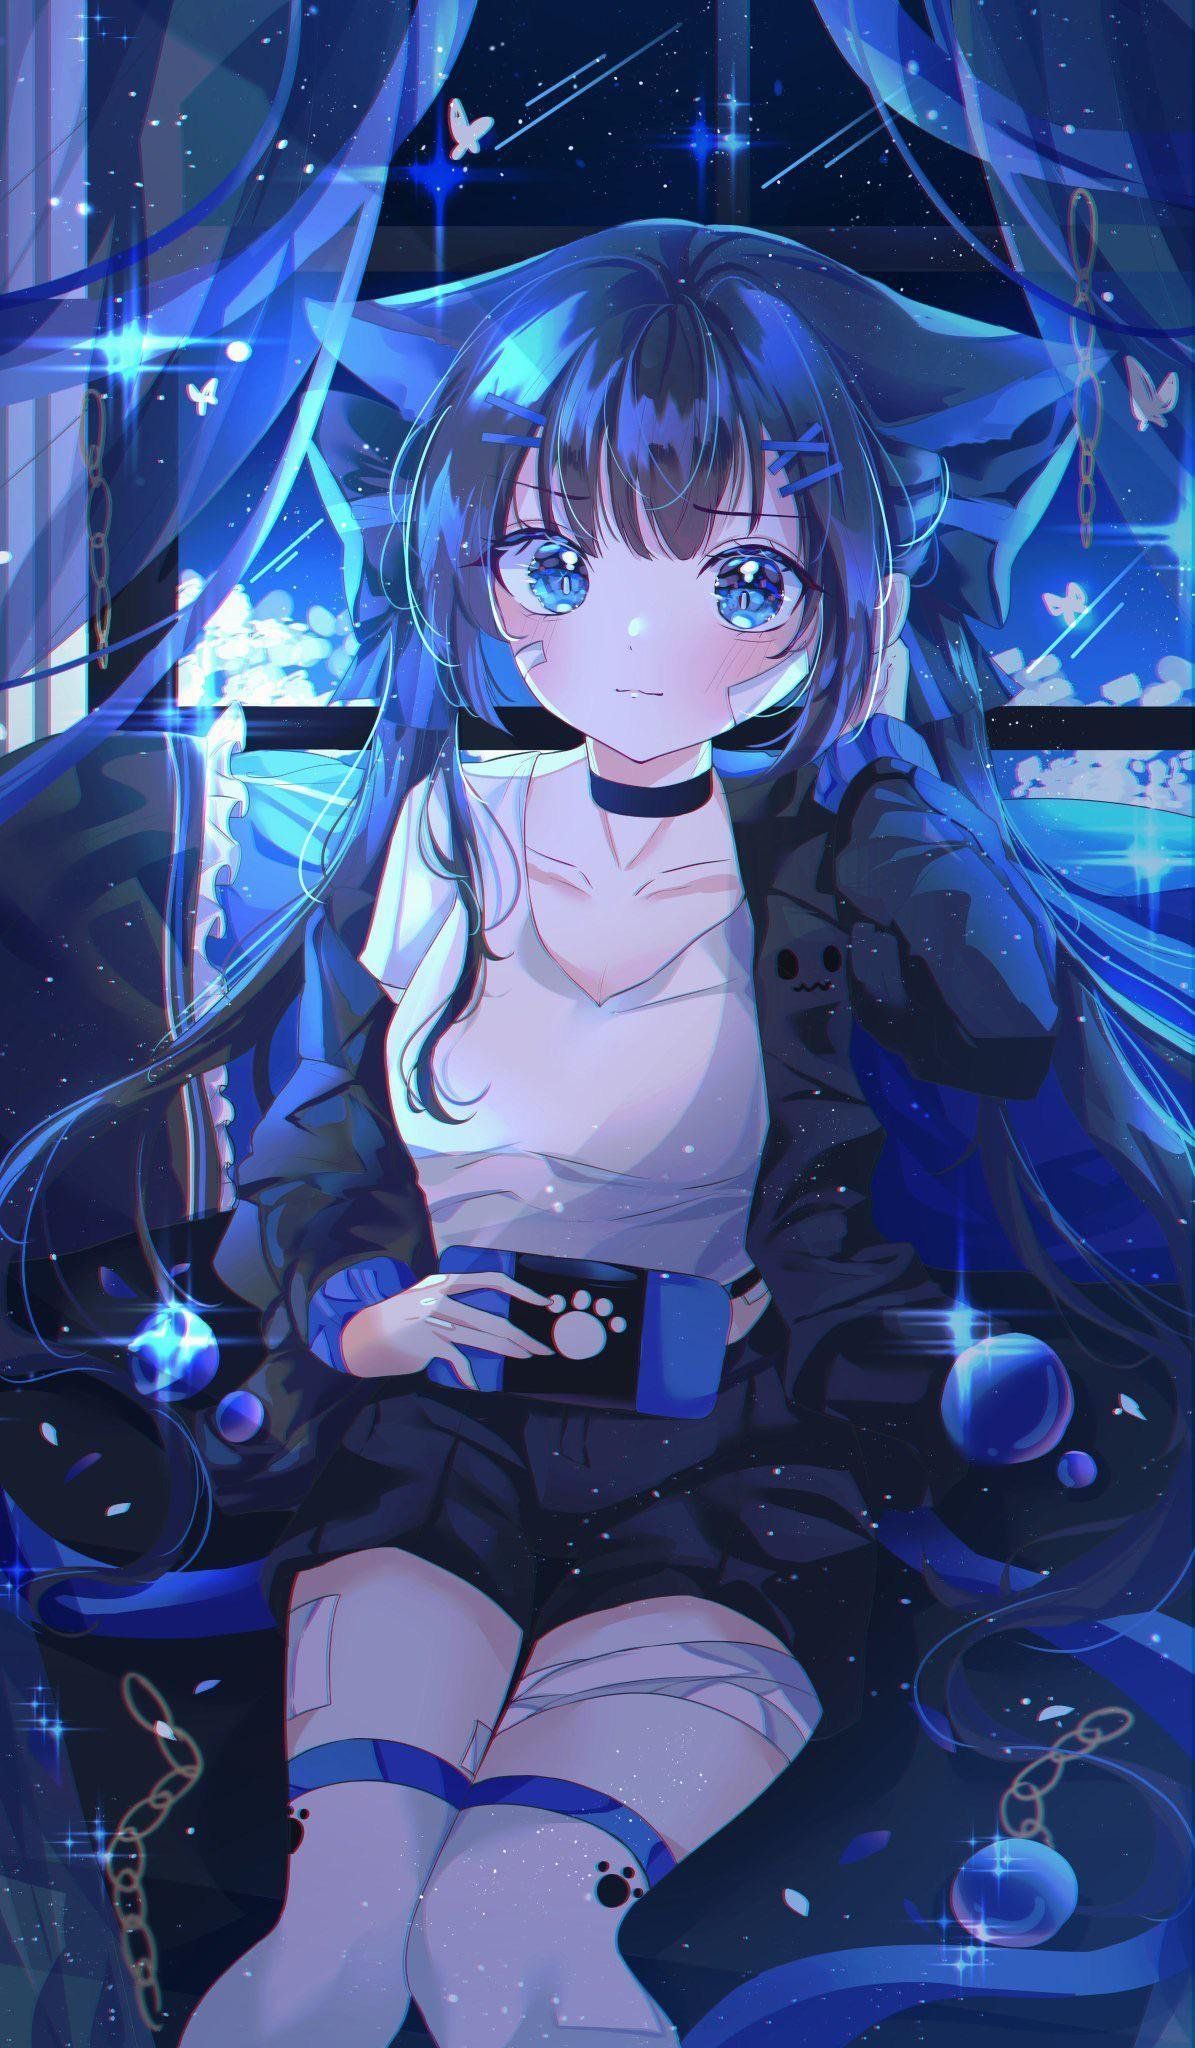 Anime girl with blue hair and blue eyes sitting on the ground - Gaming, anime girl